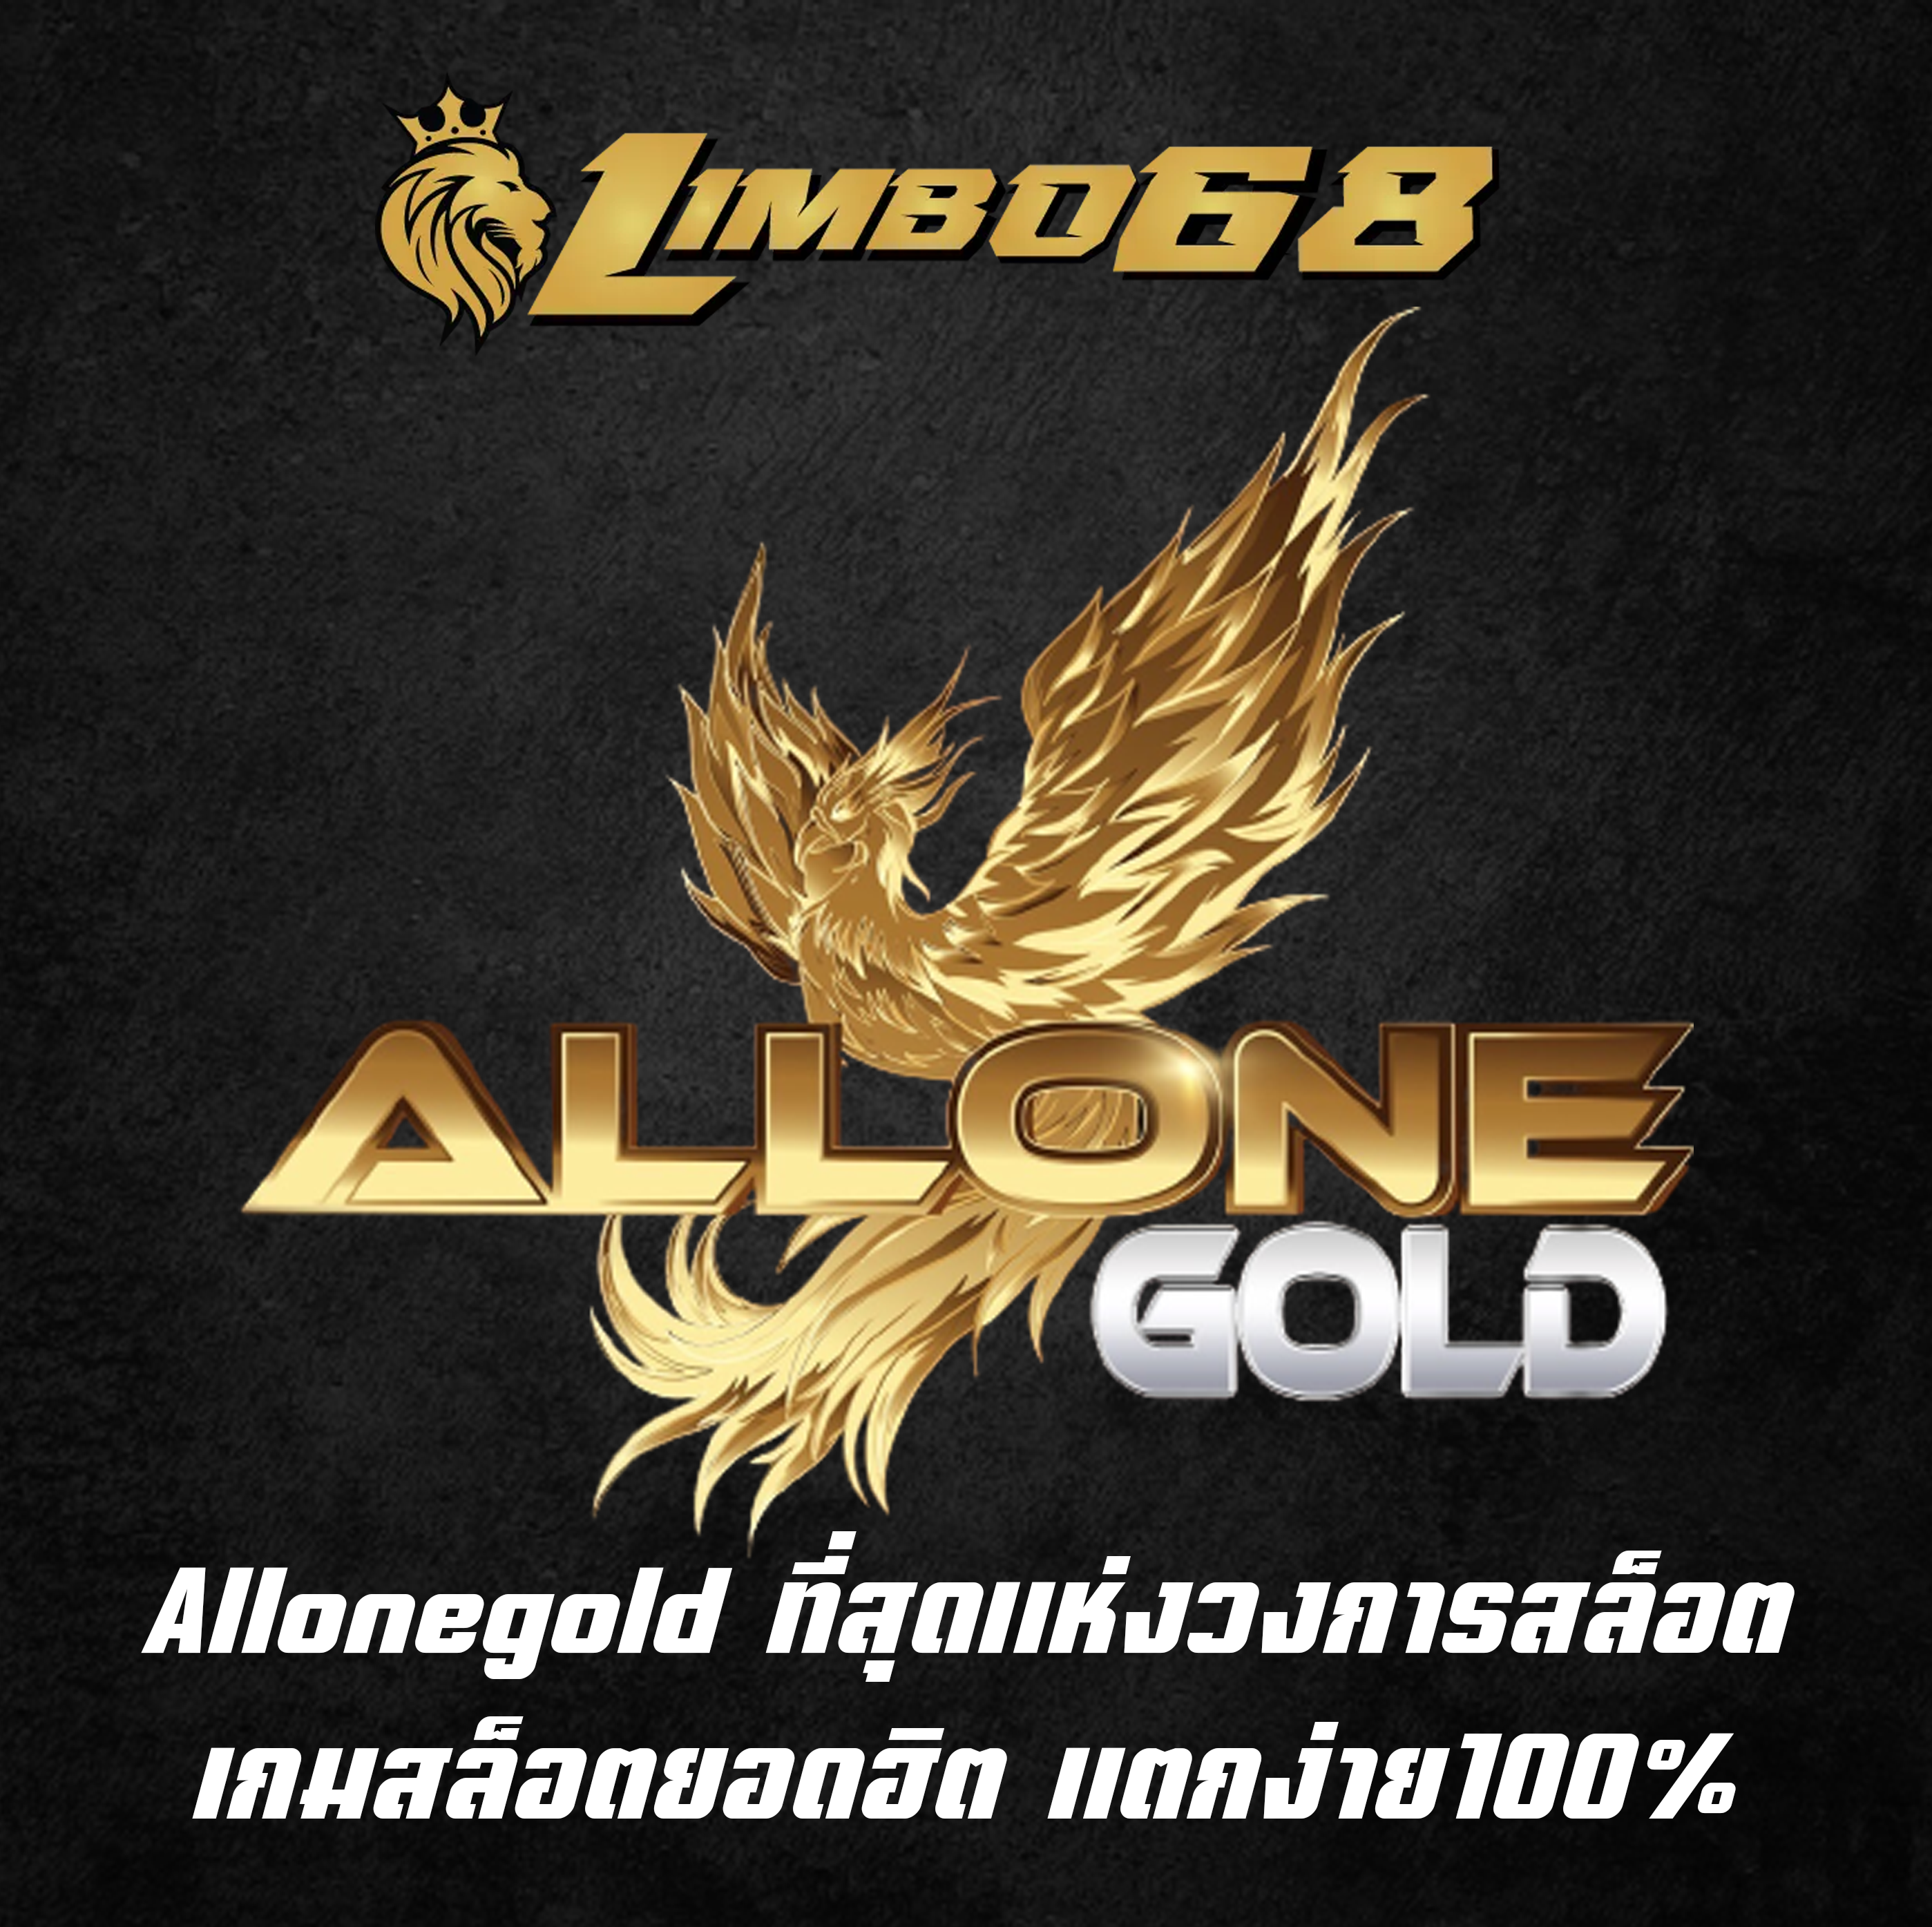 Allonegold